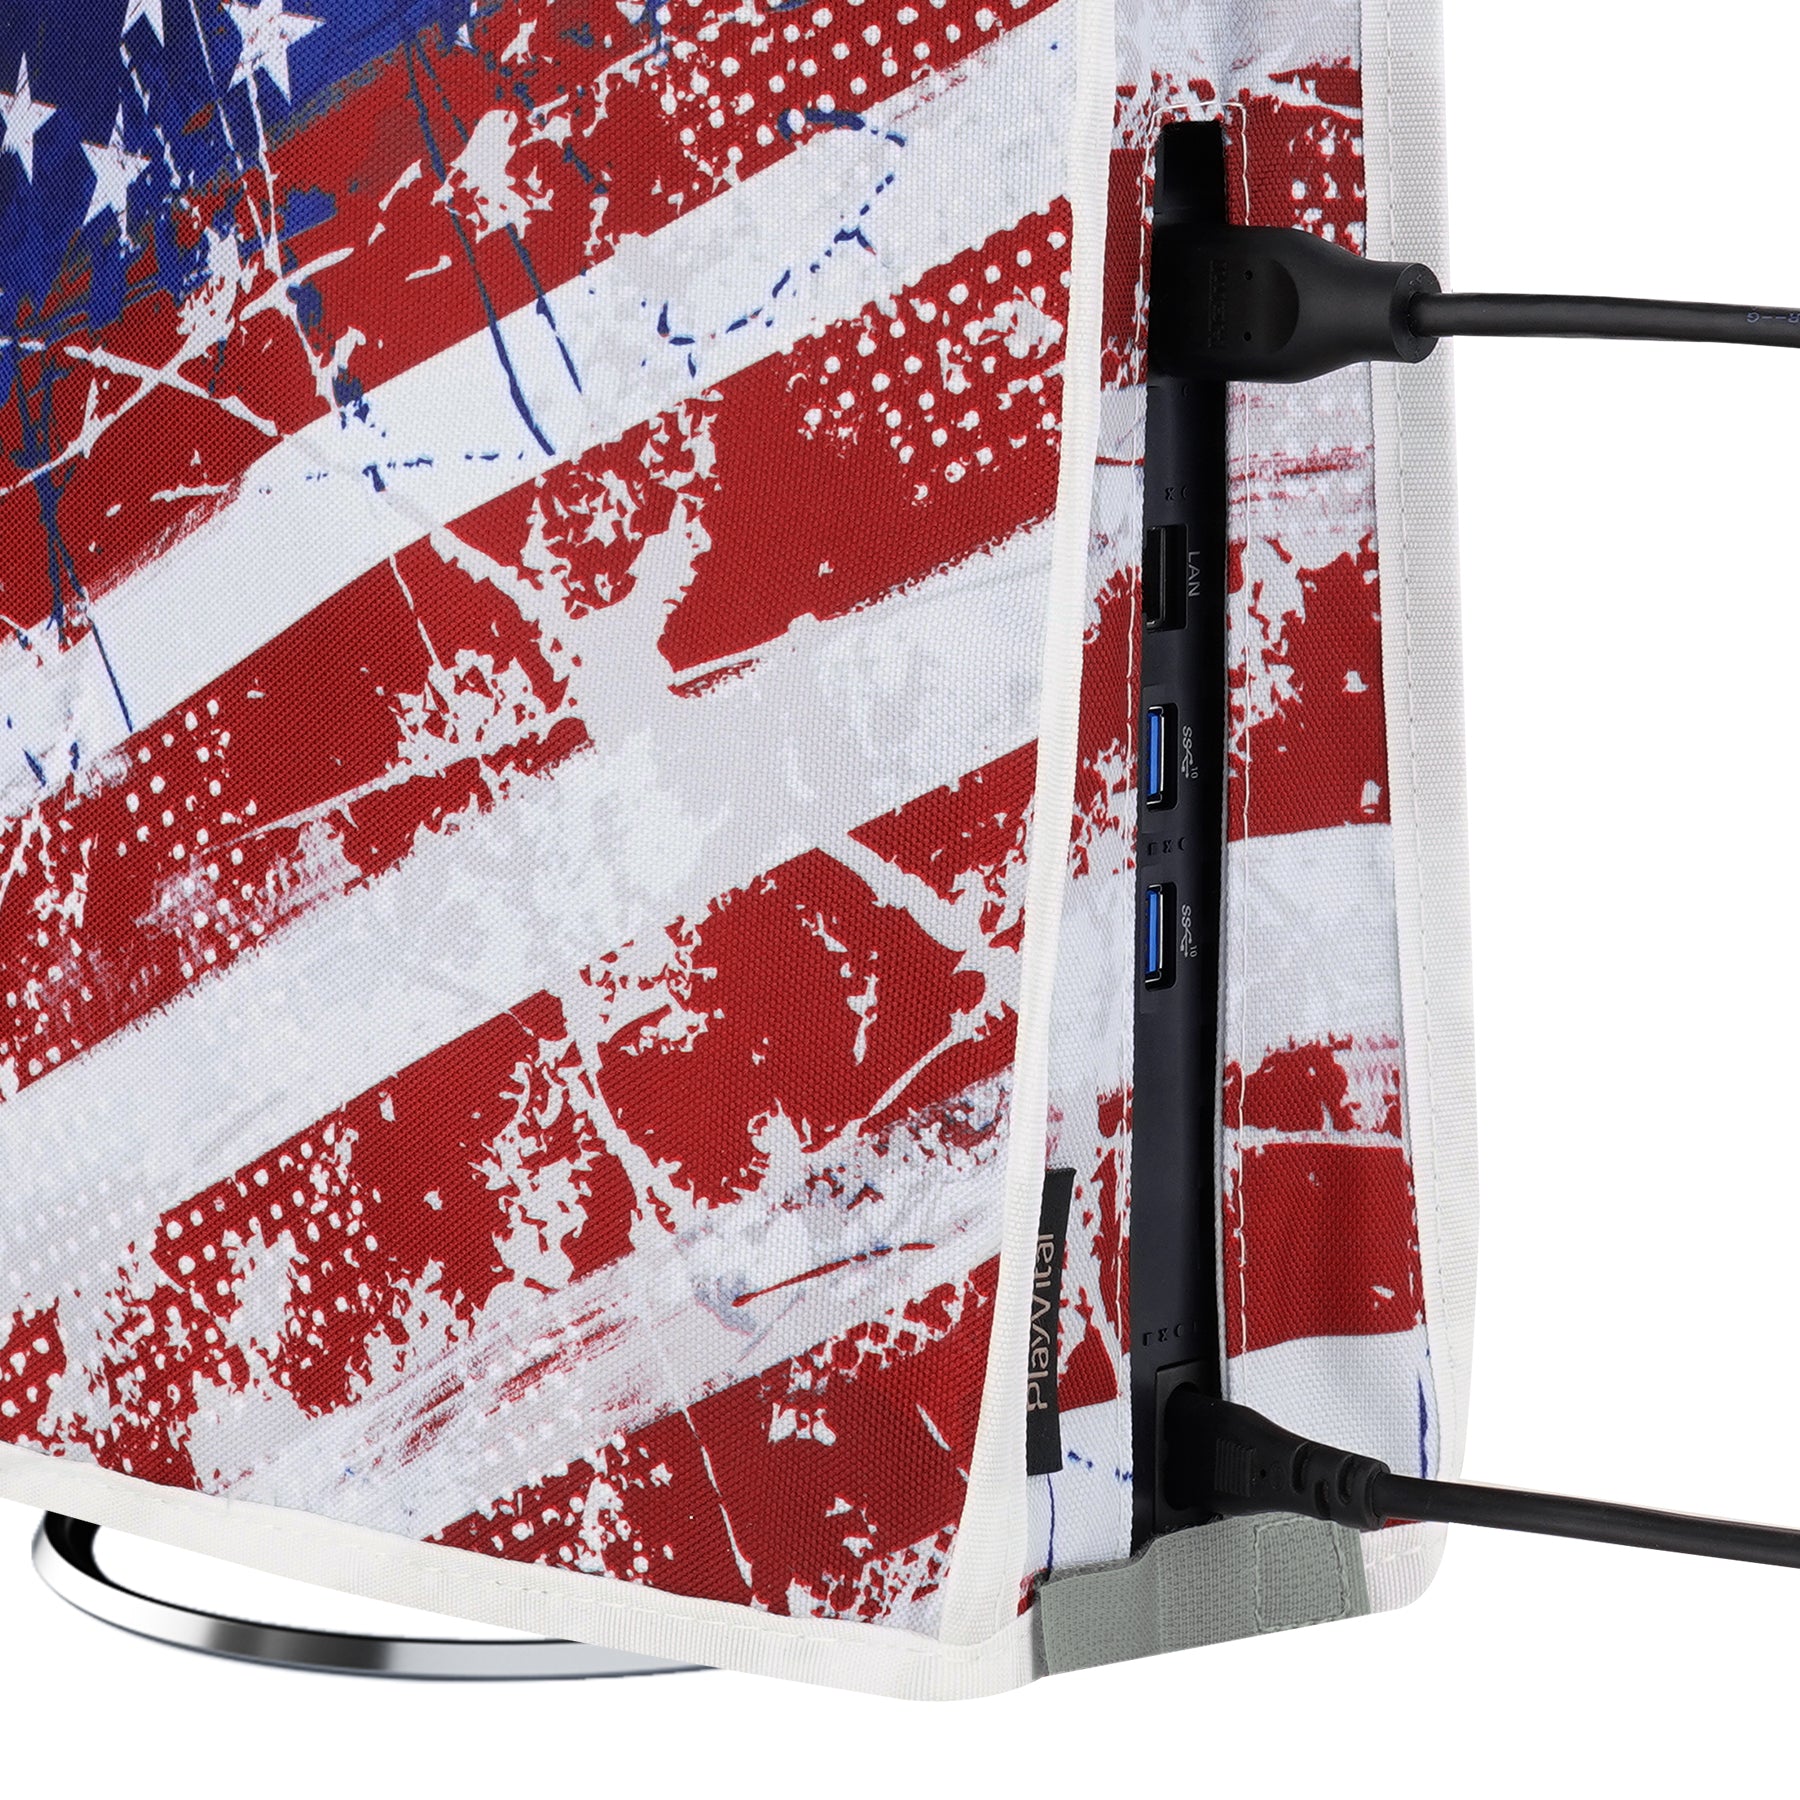 PlayVital Vertical Dust Cover for ps5 Slim Disc Edition(The New Smaller Design), Nylon Dust Proof Protector Waterproof Cover Sleeve for ps5 Slim Console - Impression US Flag - BMYPFH007 PlayVital